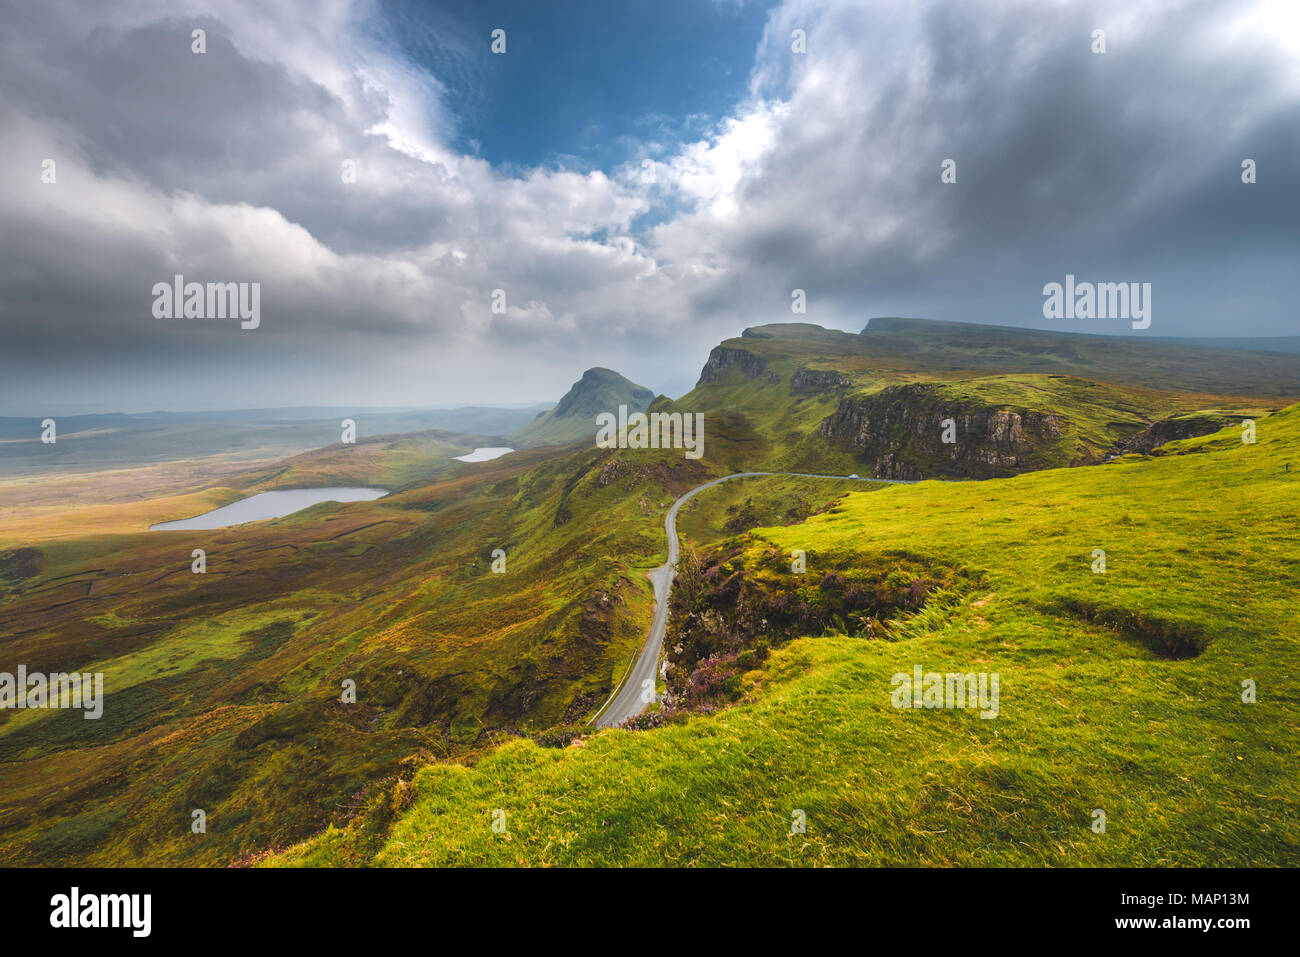 Pictures and landscapes from Scotland. Photo: Alessandro Bosio/Alamy Stock Photo